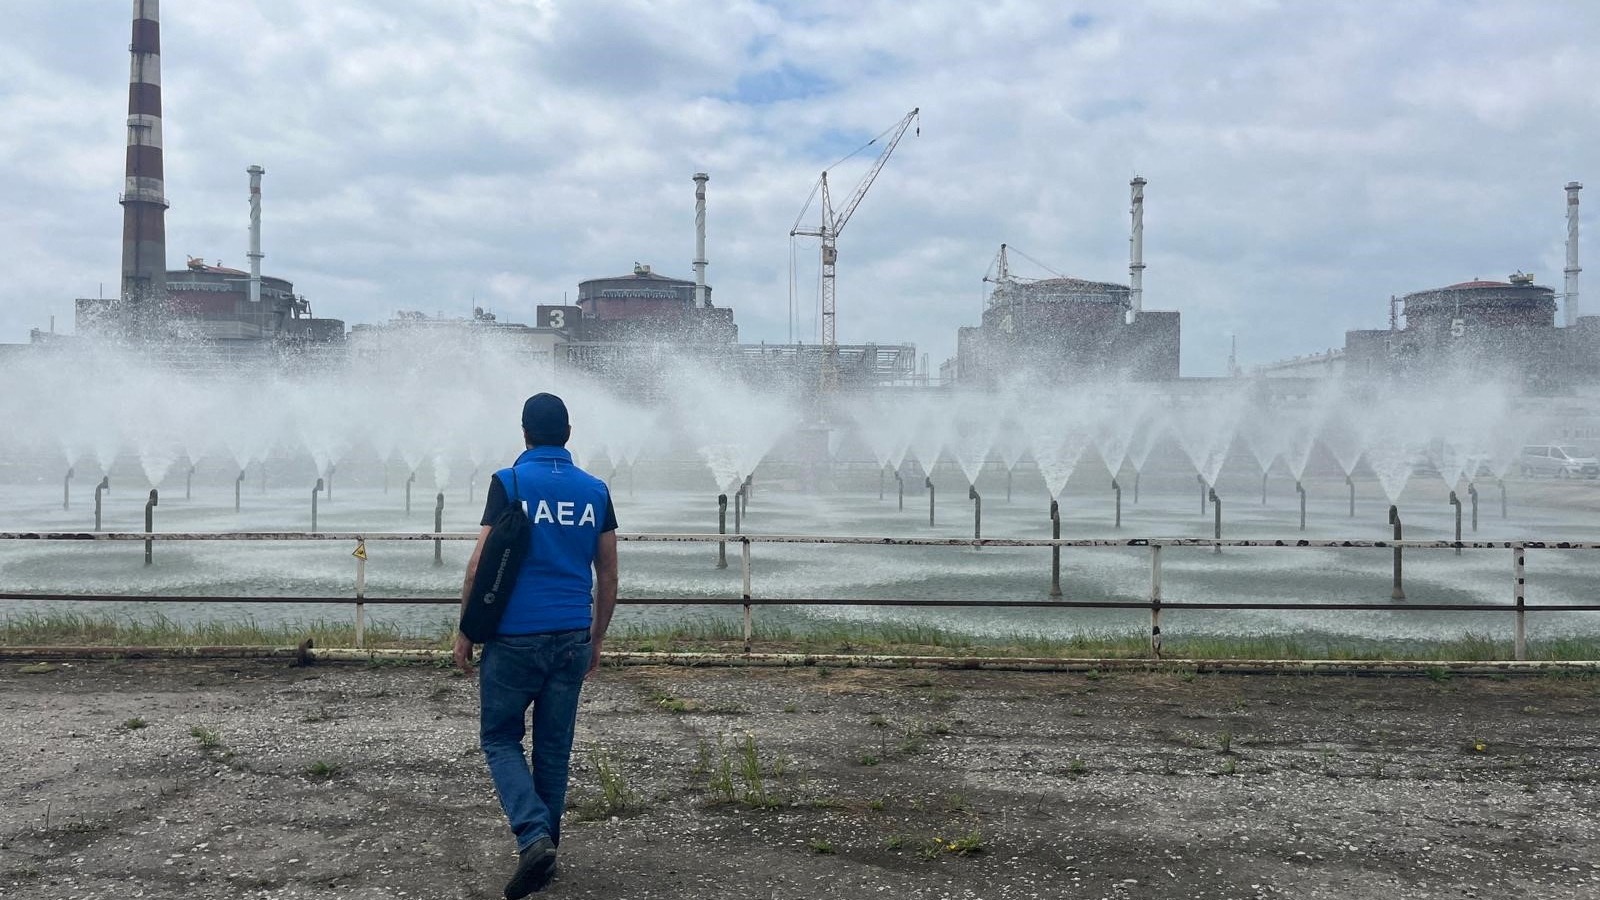 A view shows the Zaporizhzhia Nuclear Power Plant during the visit of the International Atomic Energy Agency (IAEA) expert mission, outside Enerhodar in the Zaporizhzhia region, Russian-controlled Ukraine. /International Atomic Energy Agency/Reuters